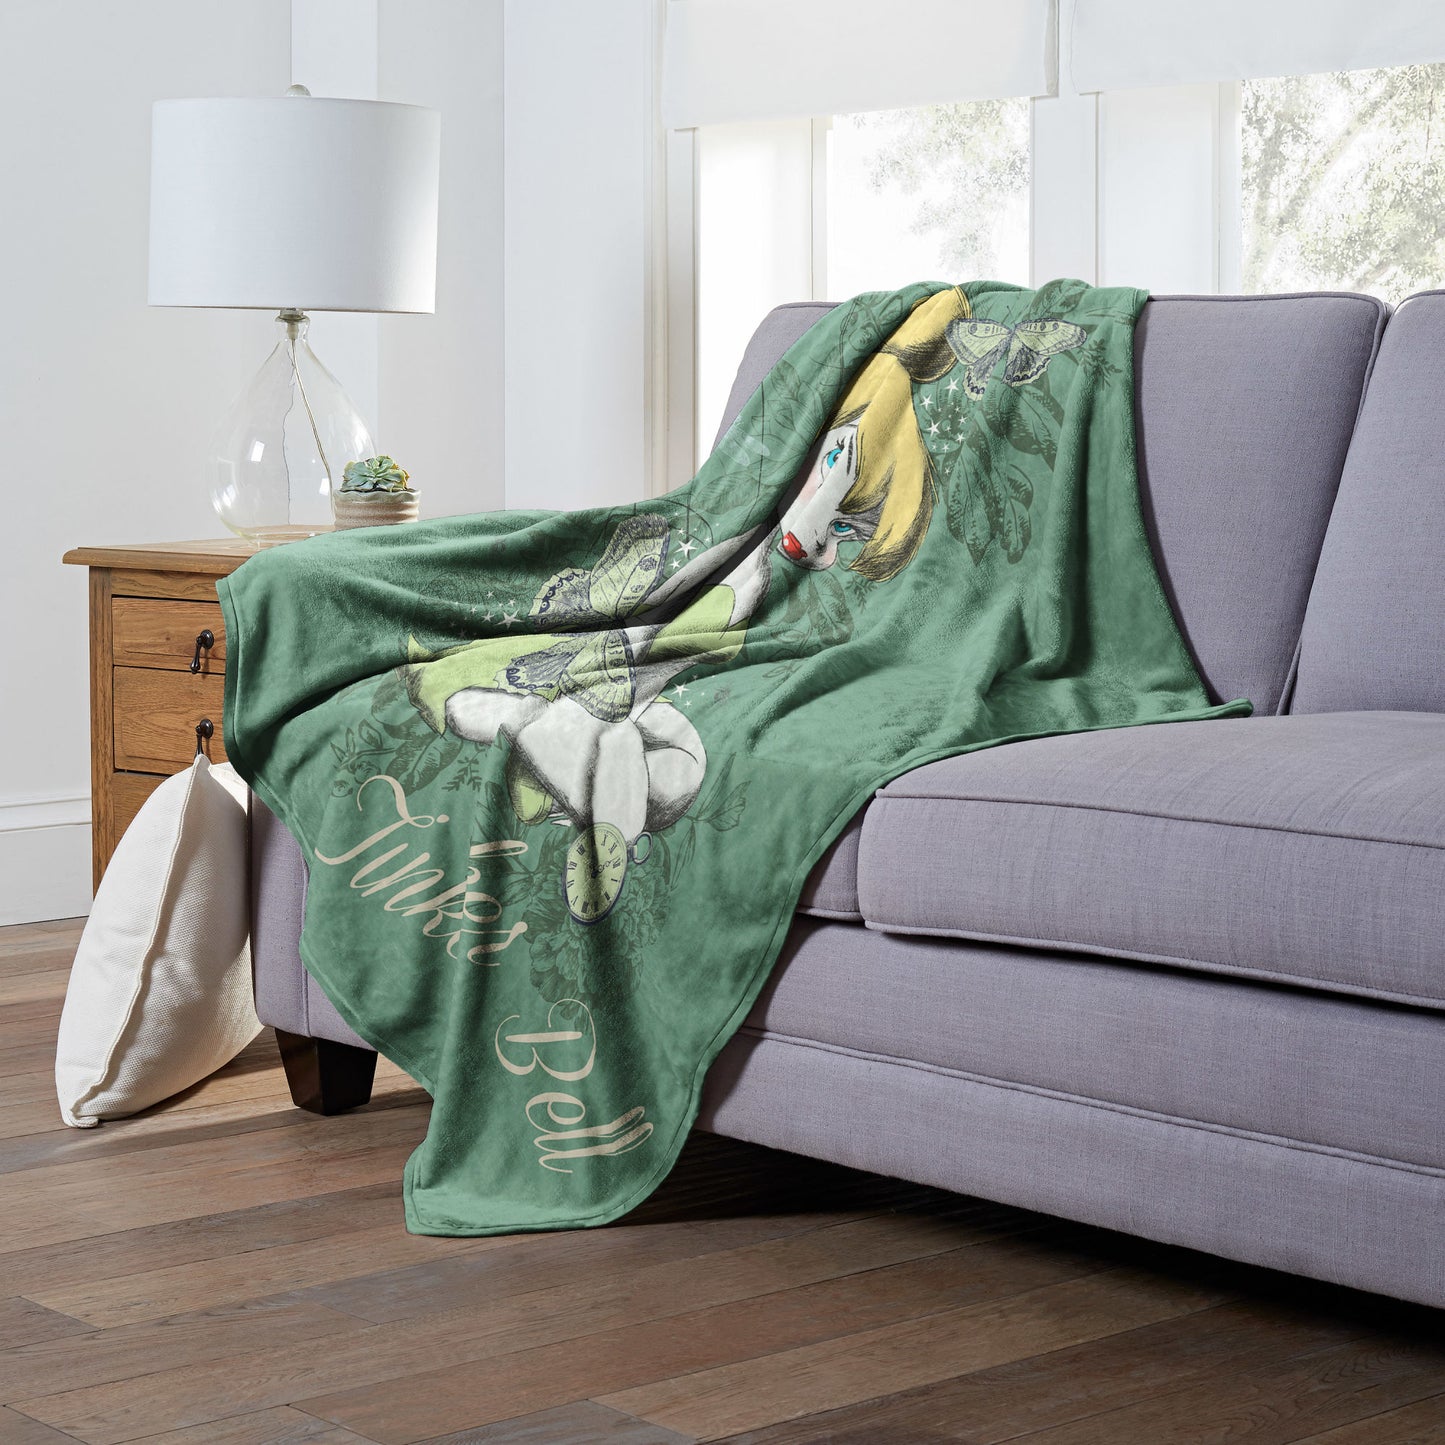 Tinkerbell, Forest Pixie Throw Blanket 50"x60"